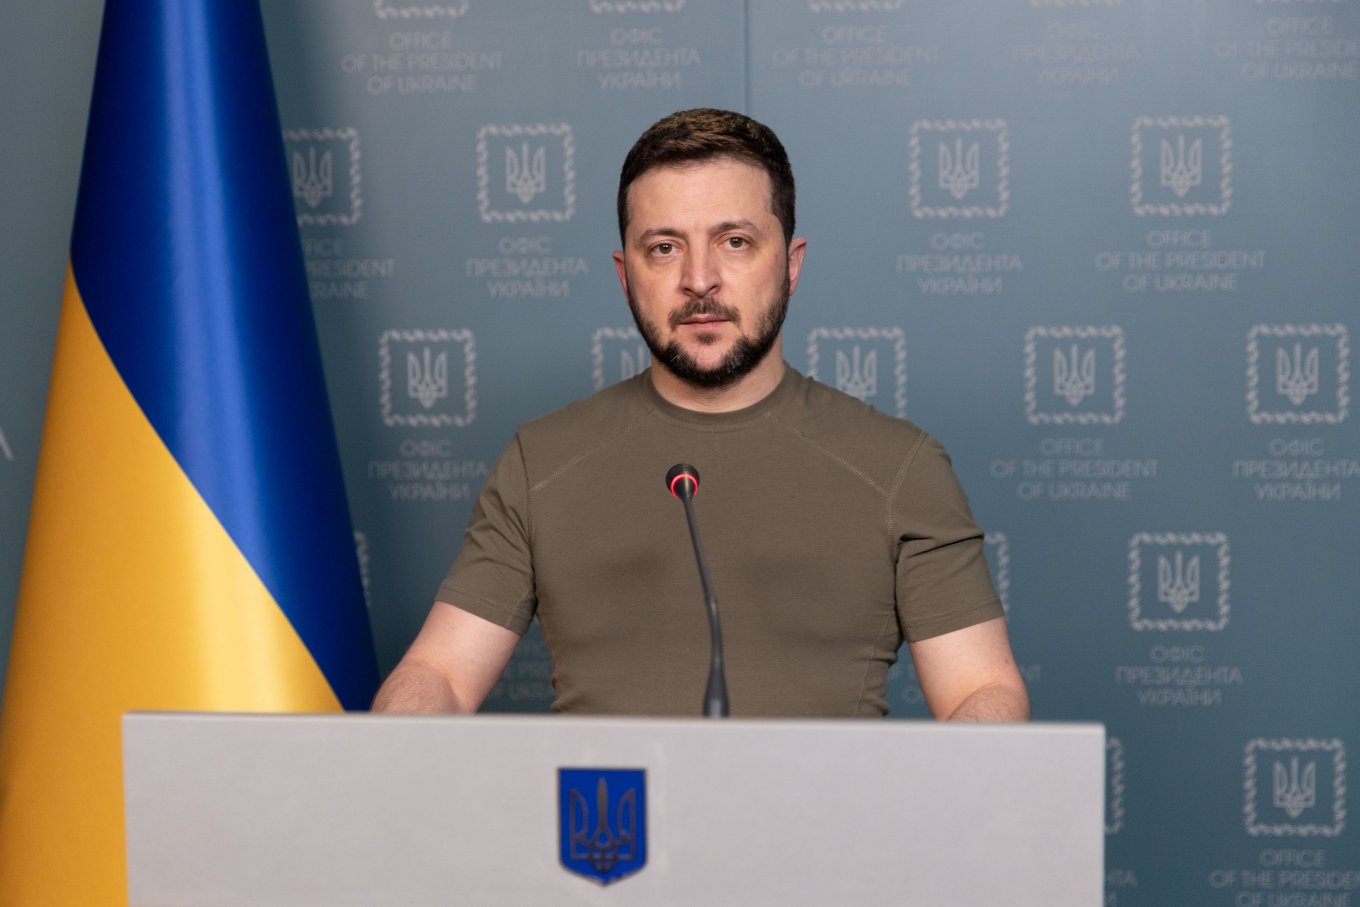 Defense Express / President of Ukraine Volodymyr Zelenskyy at his daily address on late evening April 18 / Day 55th of War Between Ukraine and Russian Federation (Live Updates)